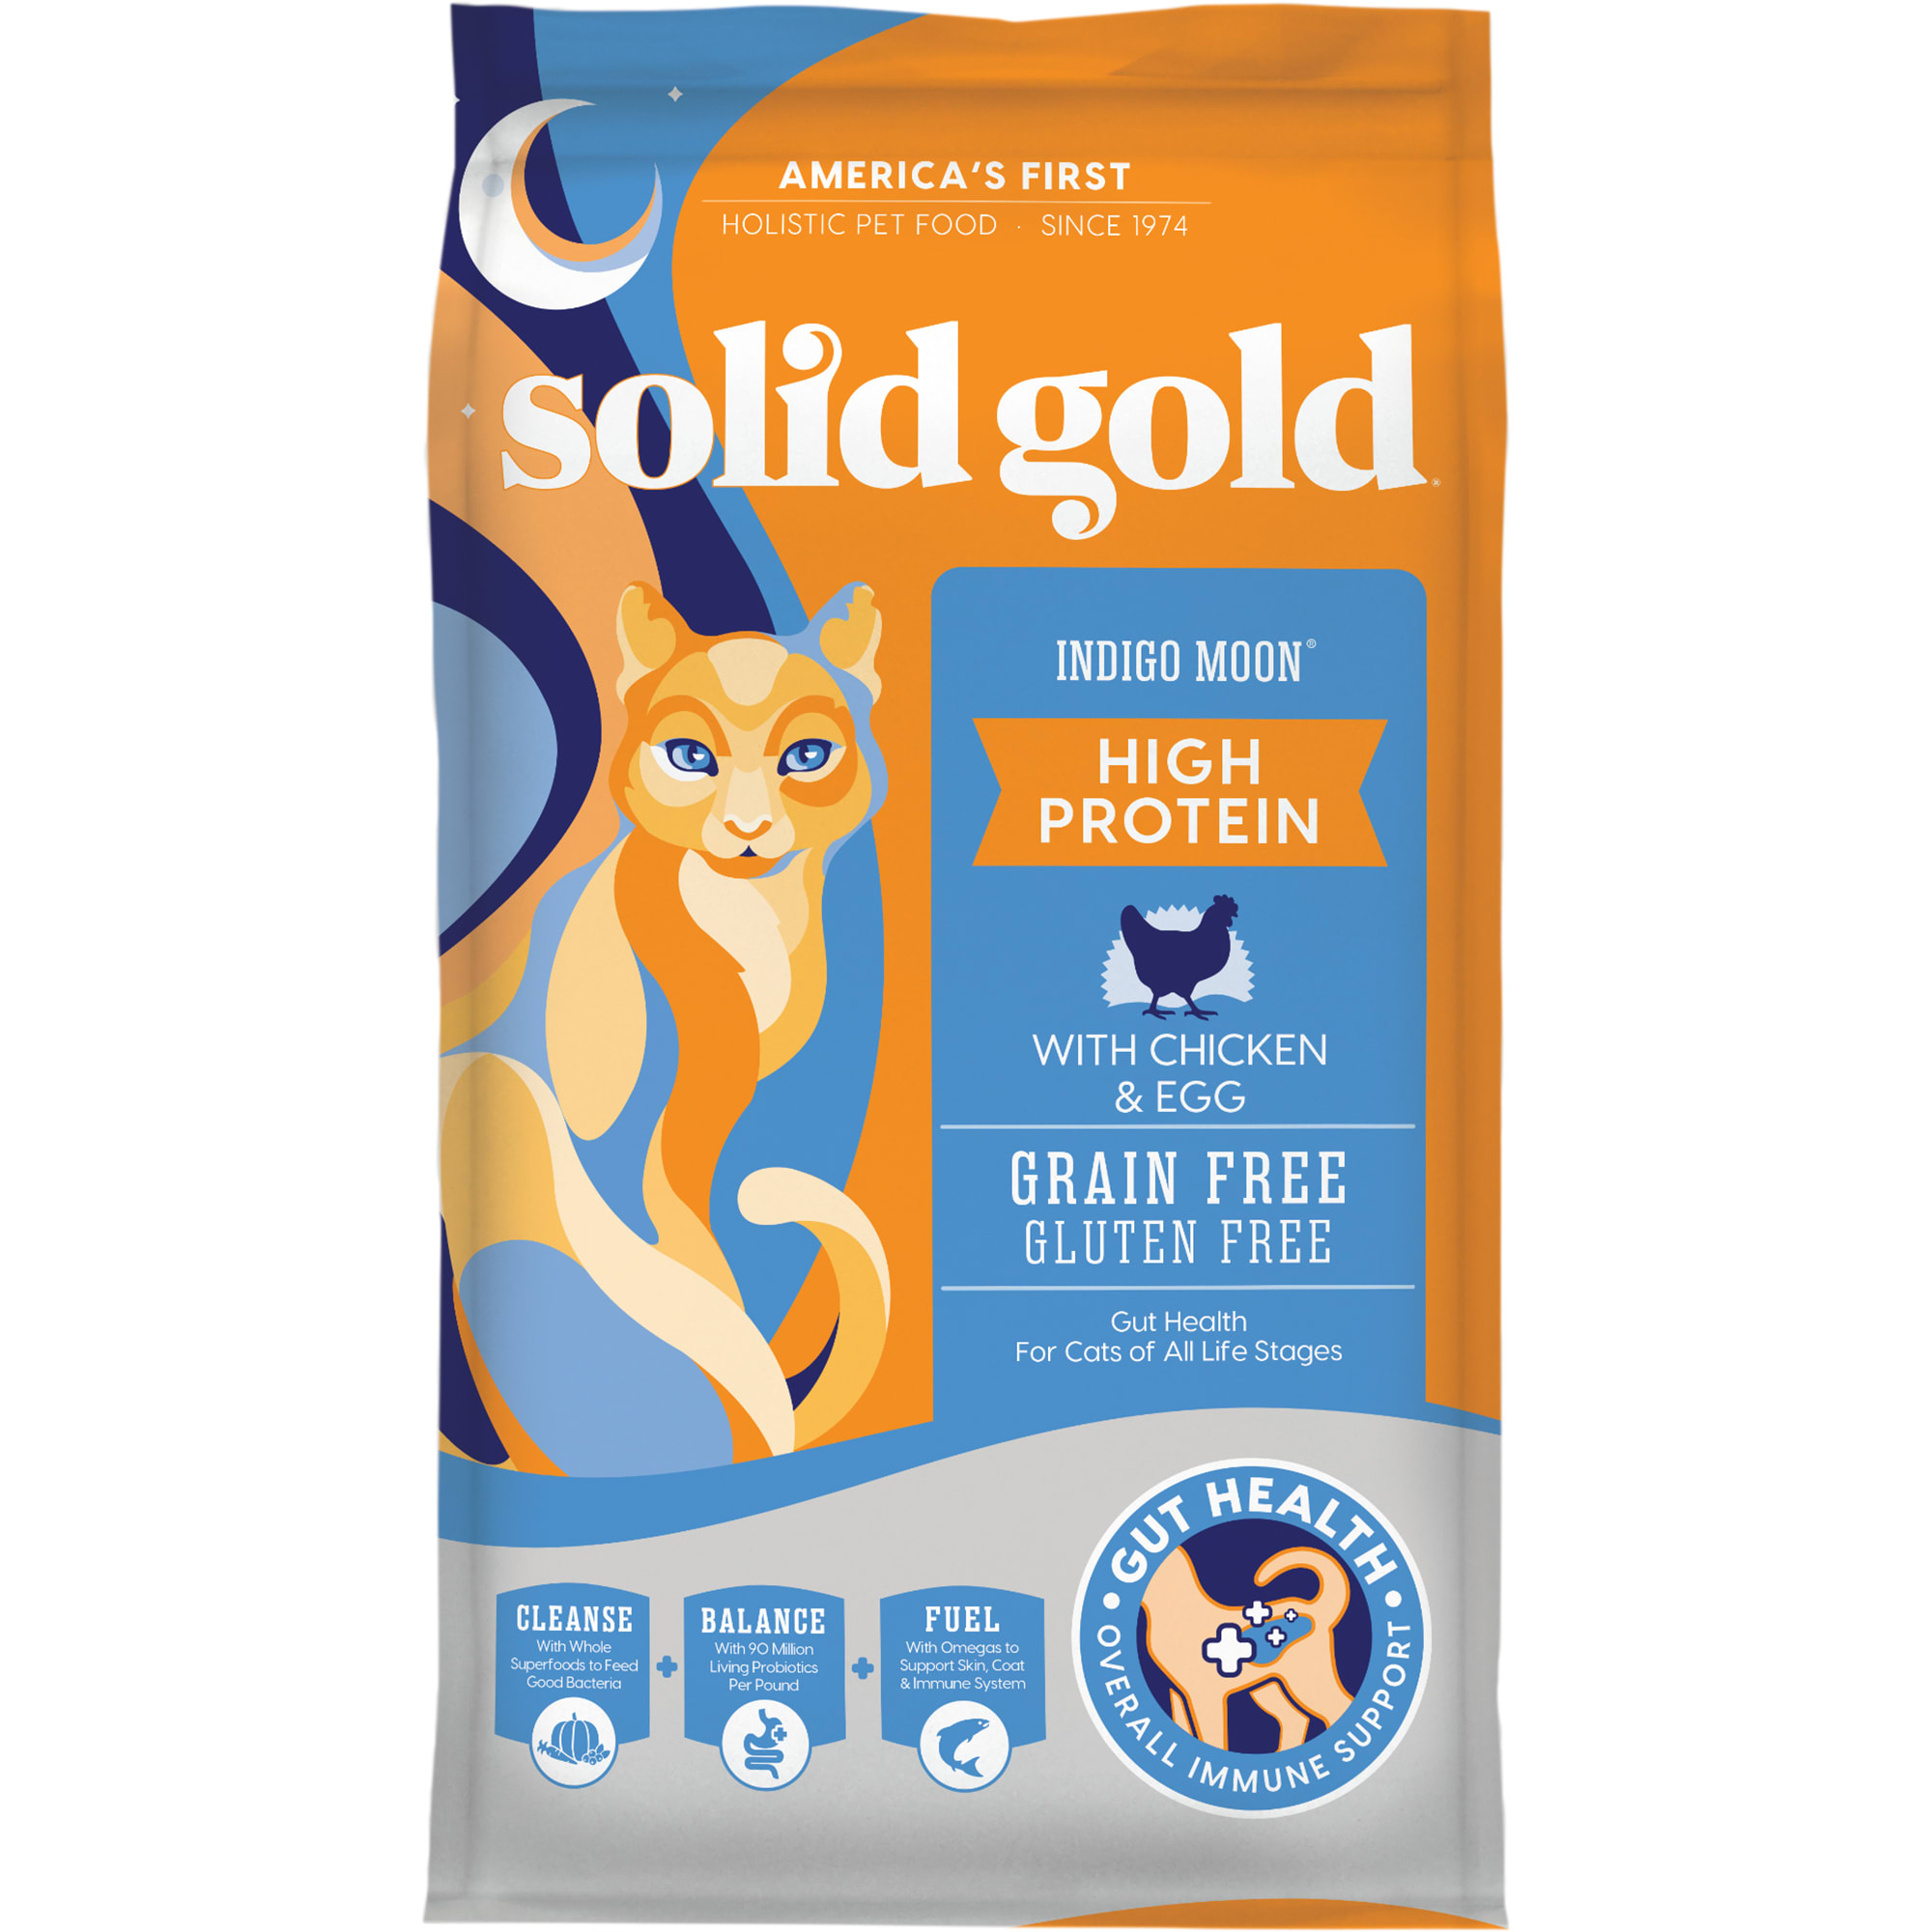 Solid Gold Indigo Moon High Protein with Chicken & Eggs Holistic Grain